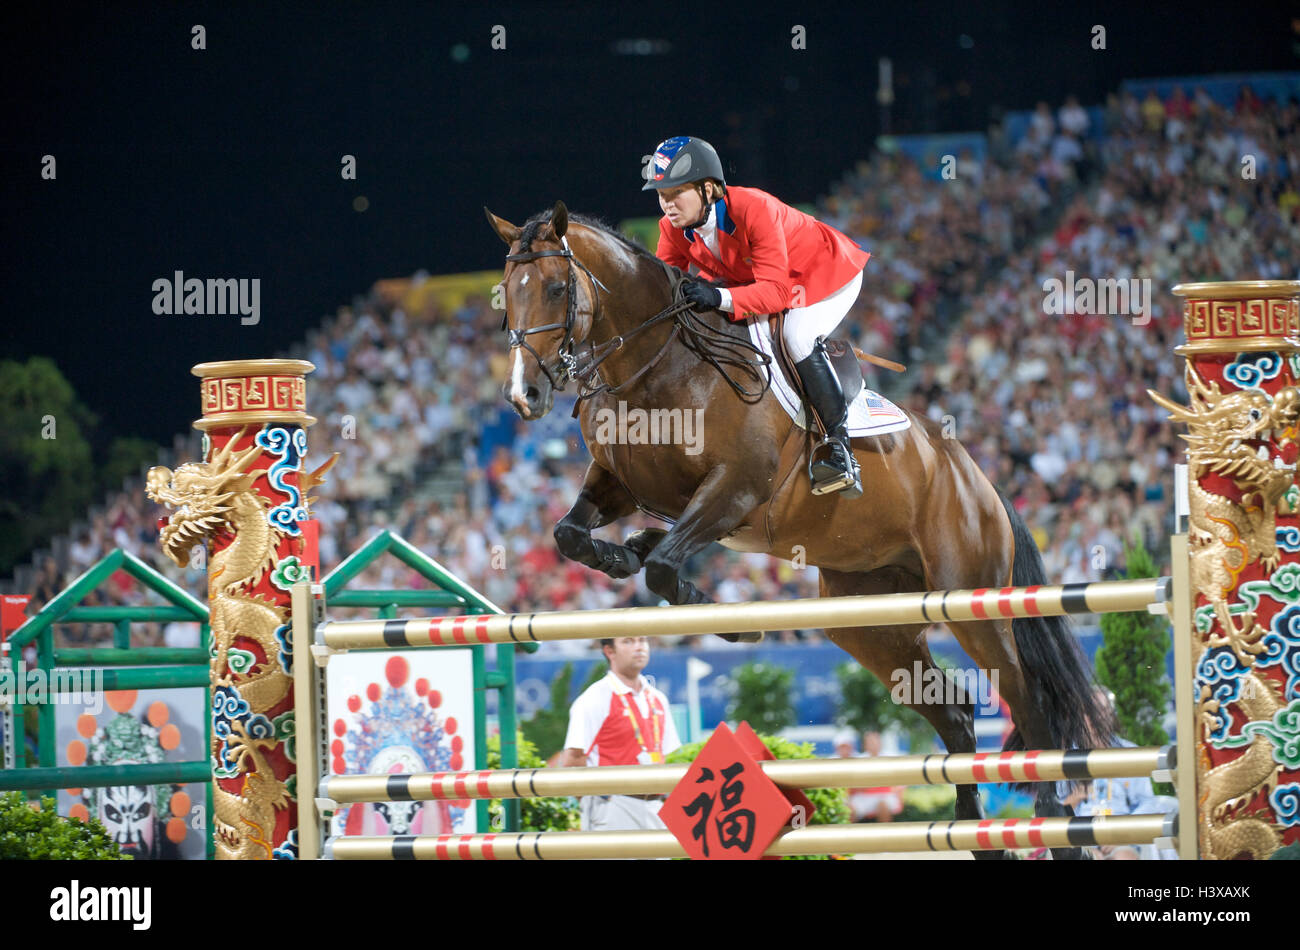 Olympic Games 2008, Hong Kong (Beijing Games) August 2008, Beezie Madden (USA) riding Authentic, team jumping final Stock Photo